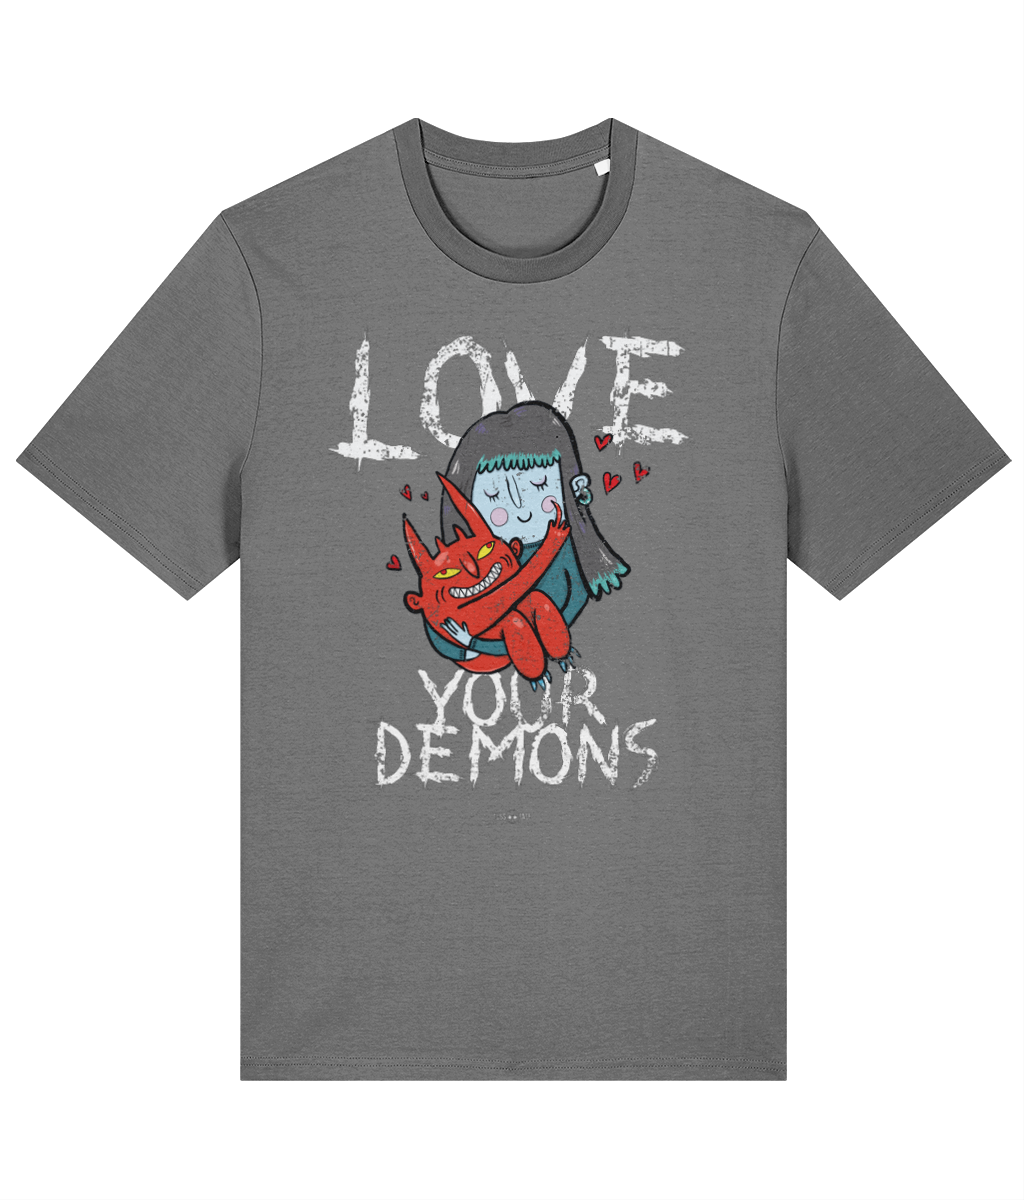 Love Your Demons - TussFace T-shirt